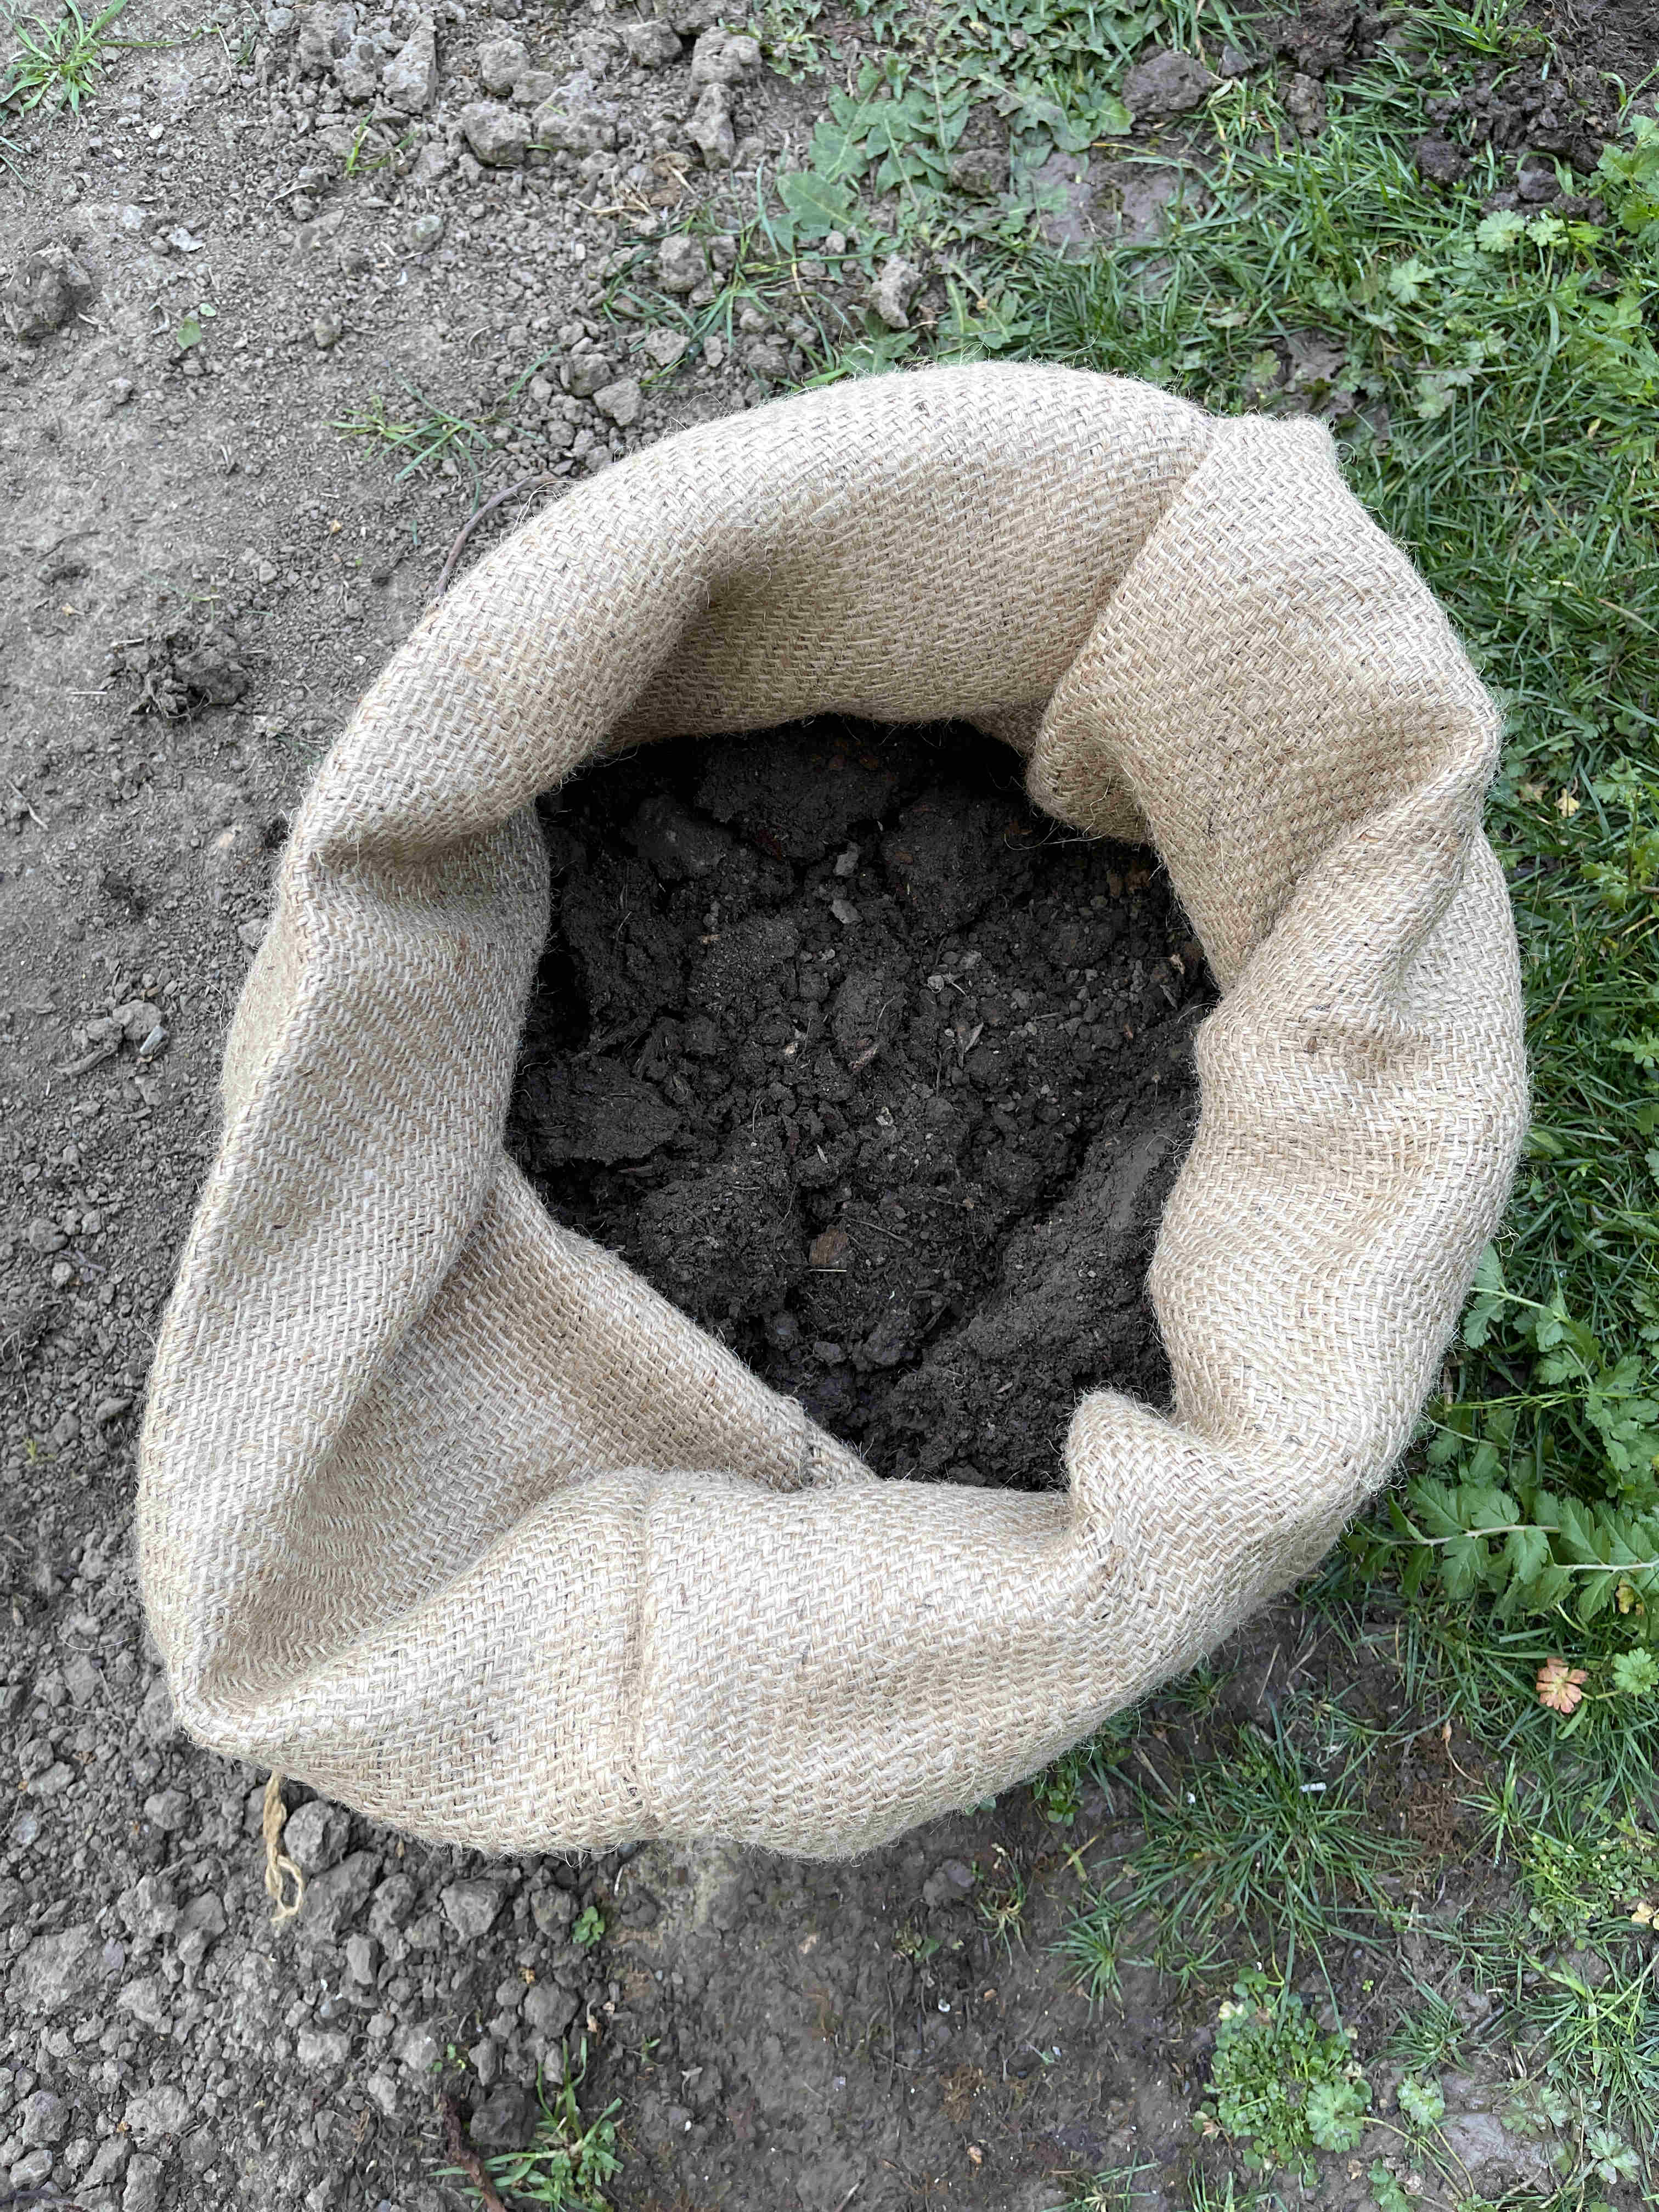 burlap sack planters partially filled